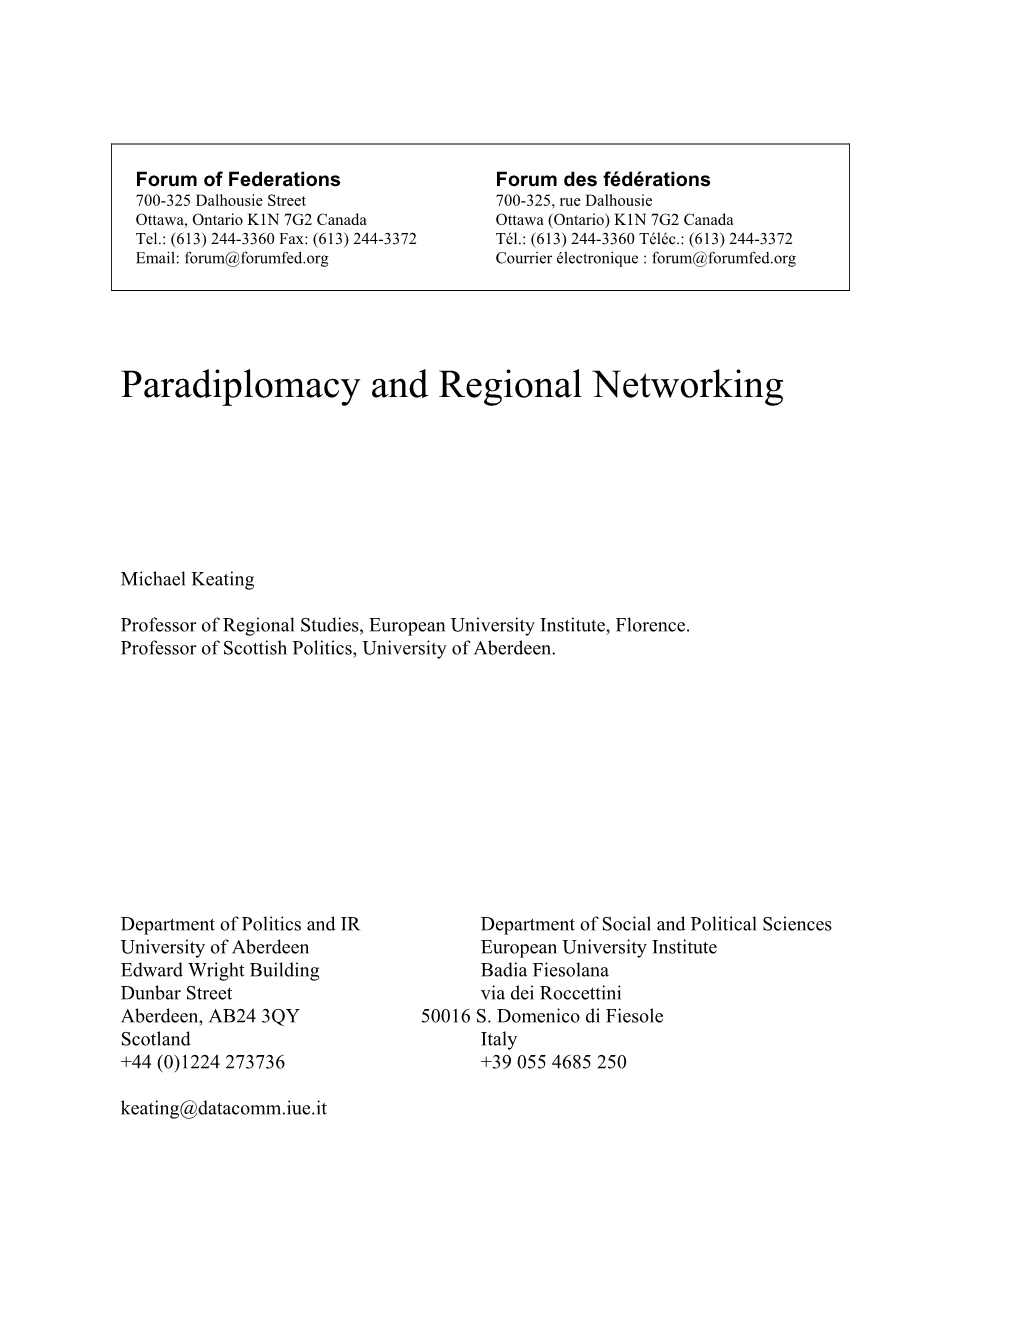 Paradiplomacy and Regional Networking